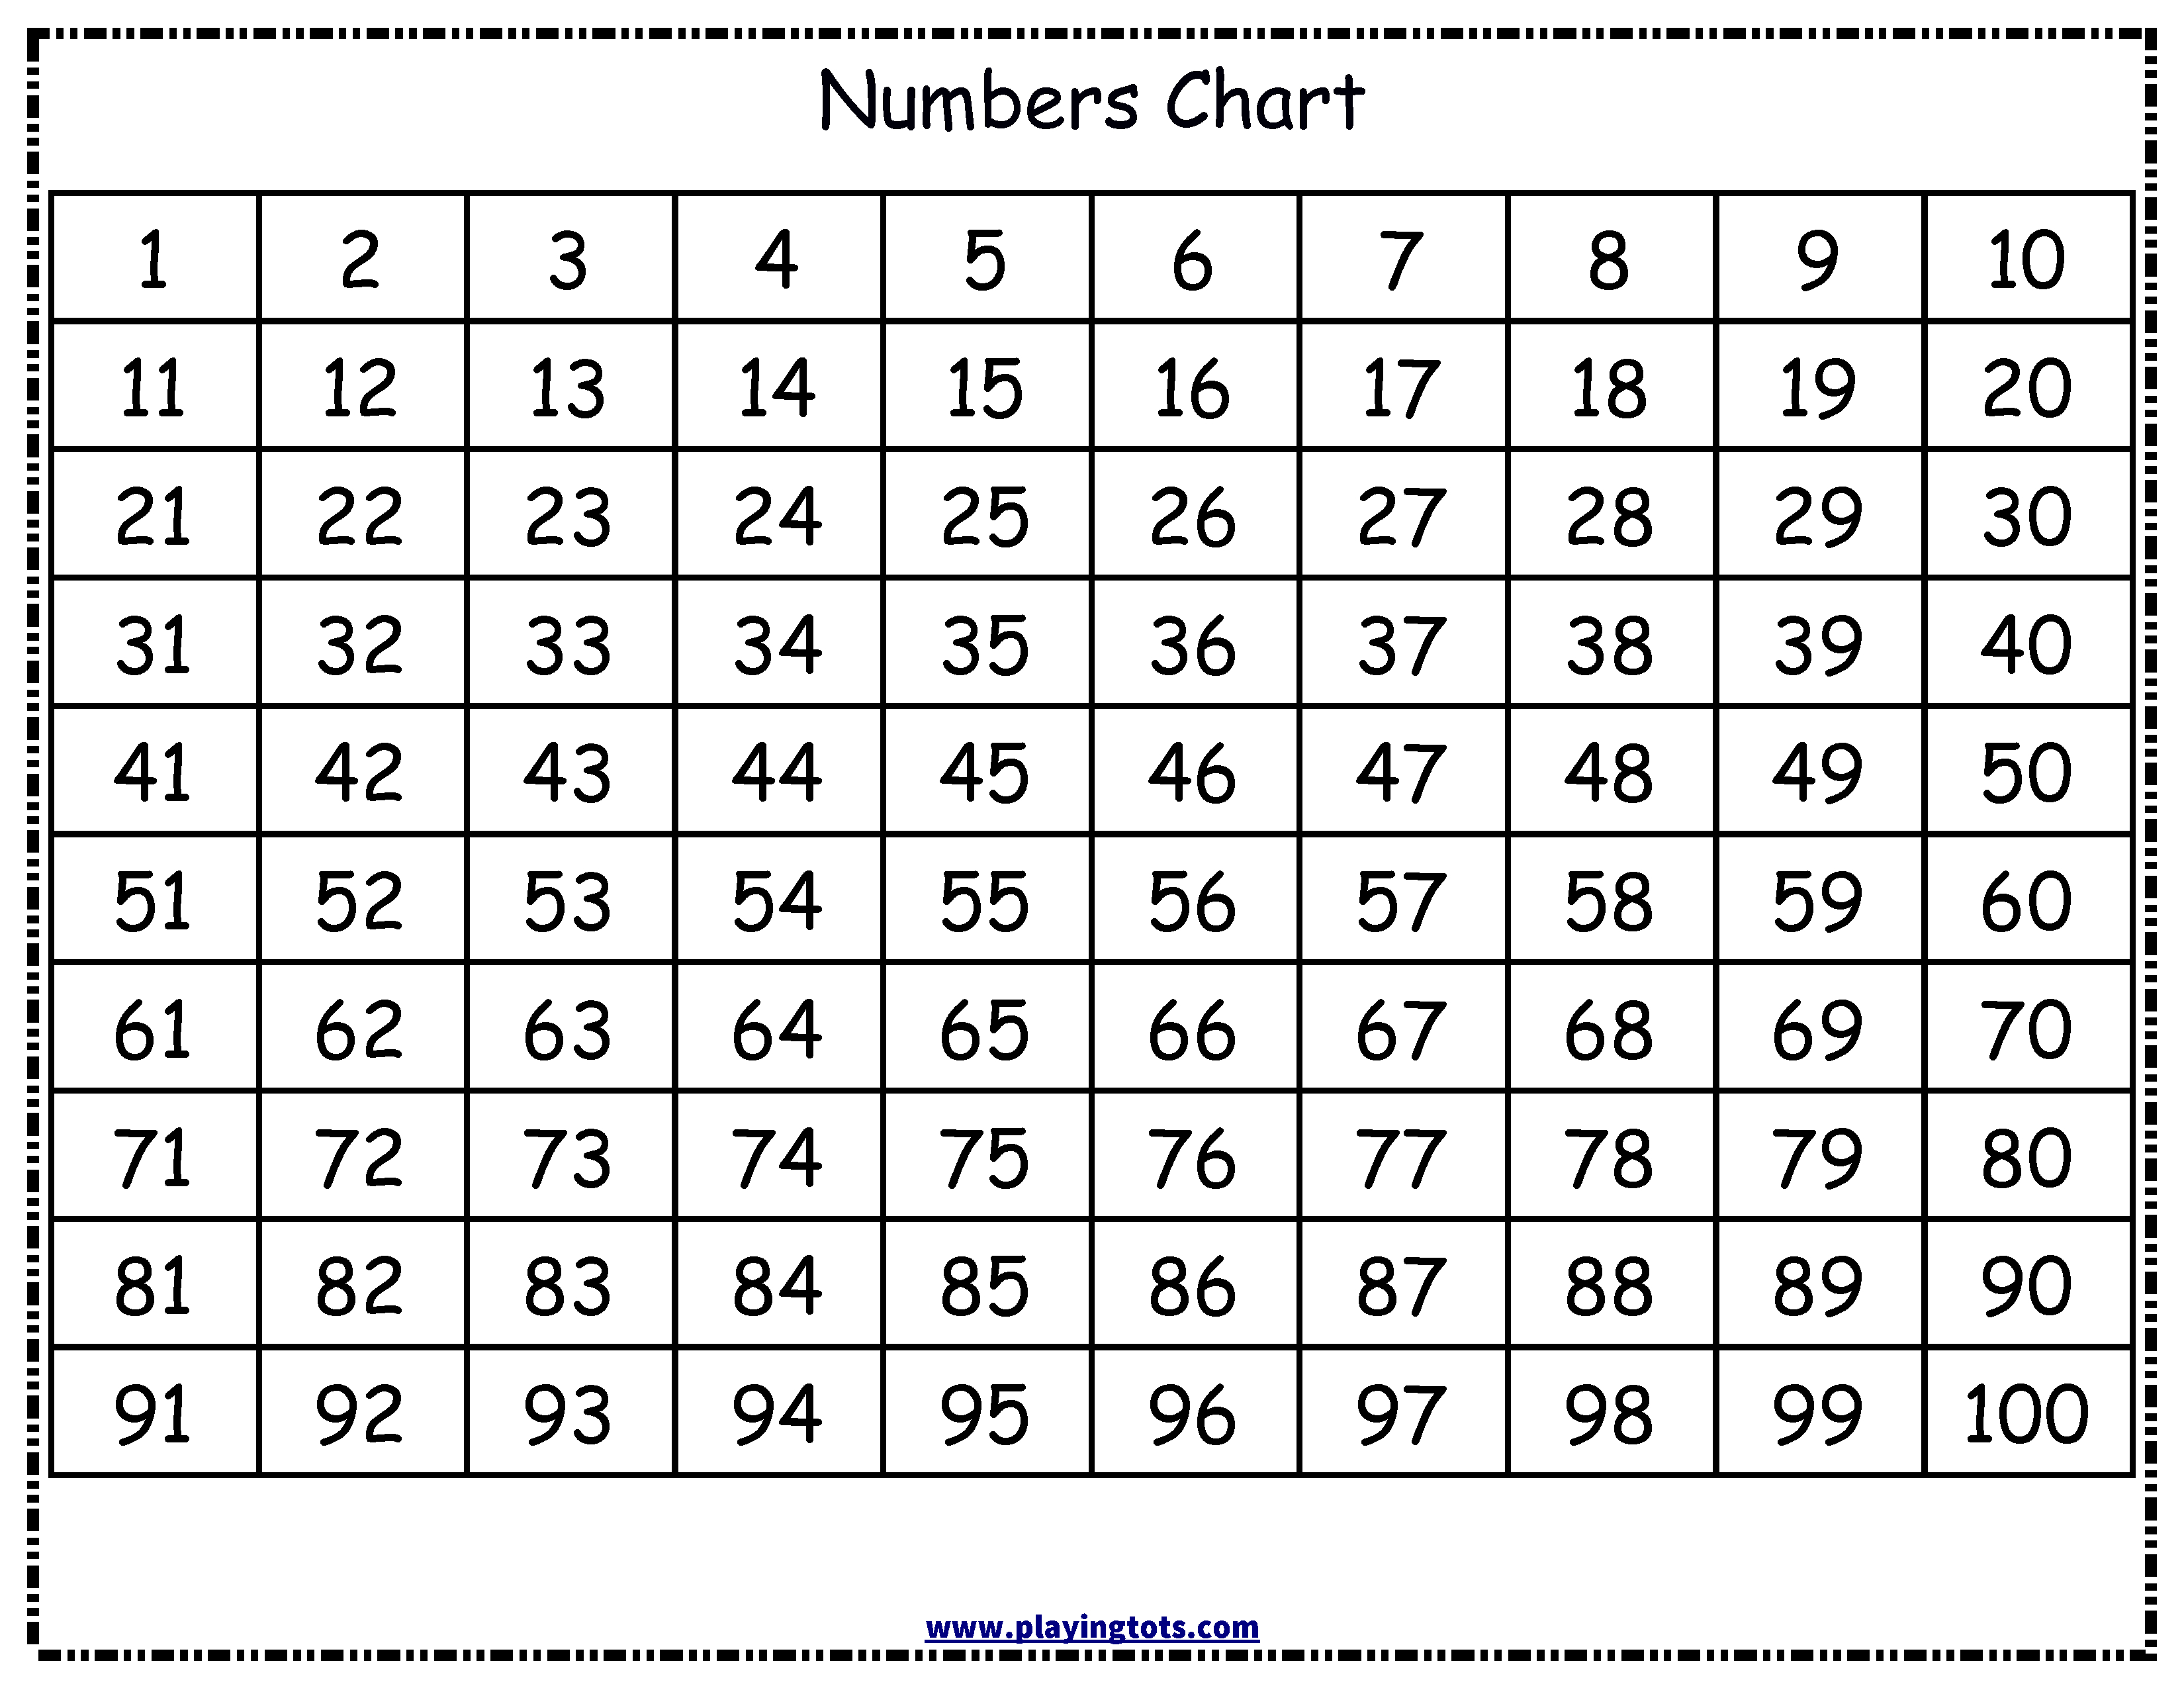 Free Printable Number Charts And 100 Charts For Counting Skip Numbers 1 100 Printable 